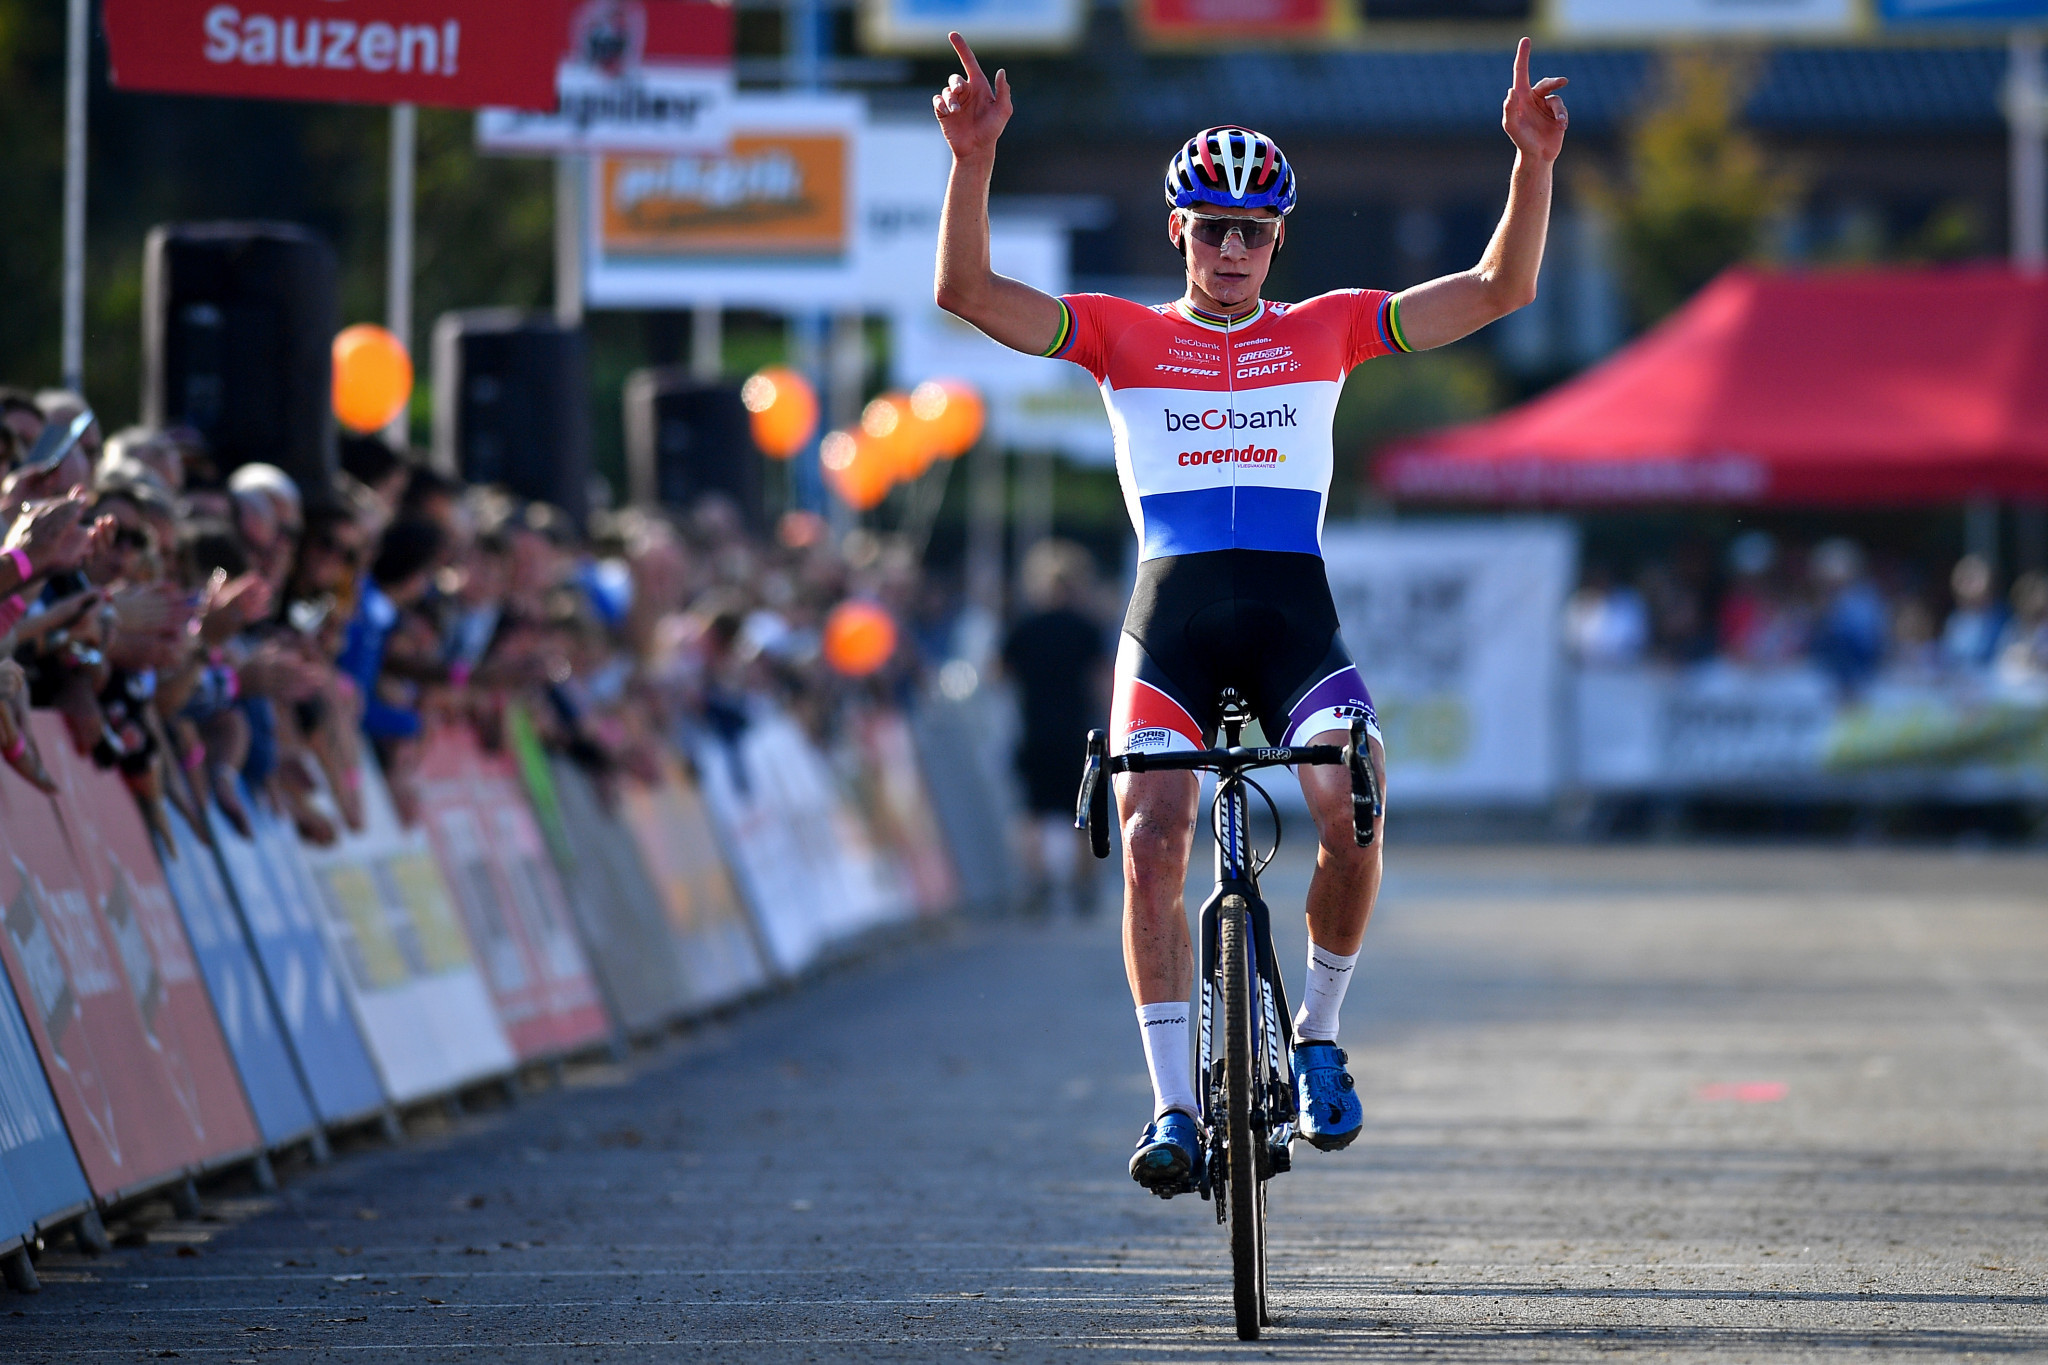 Mathieu van der Poel will hope to continue his fine start to the season ©Getty Images